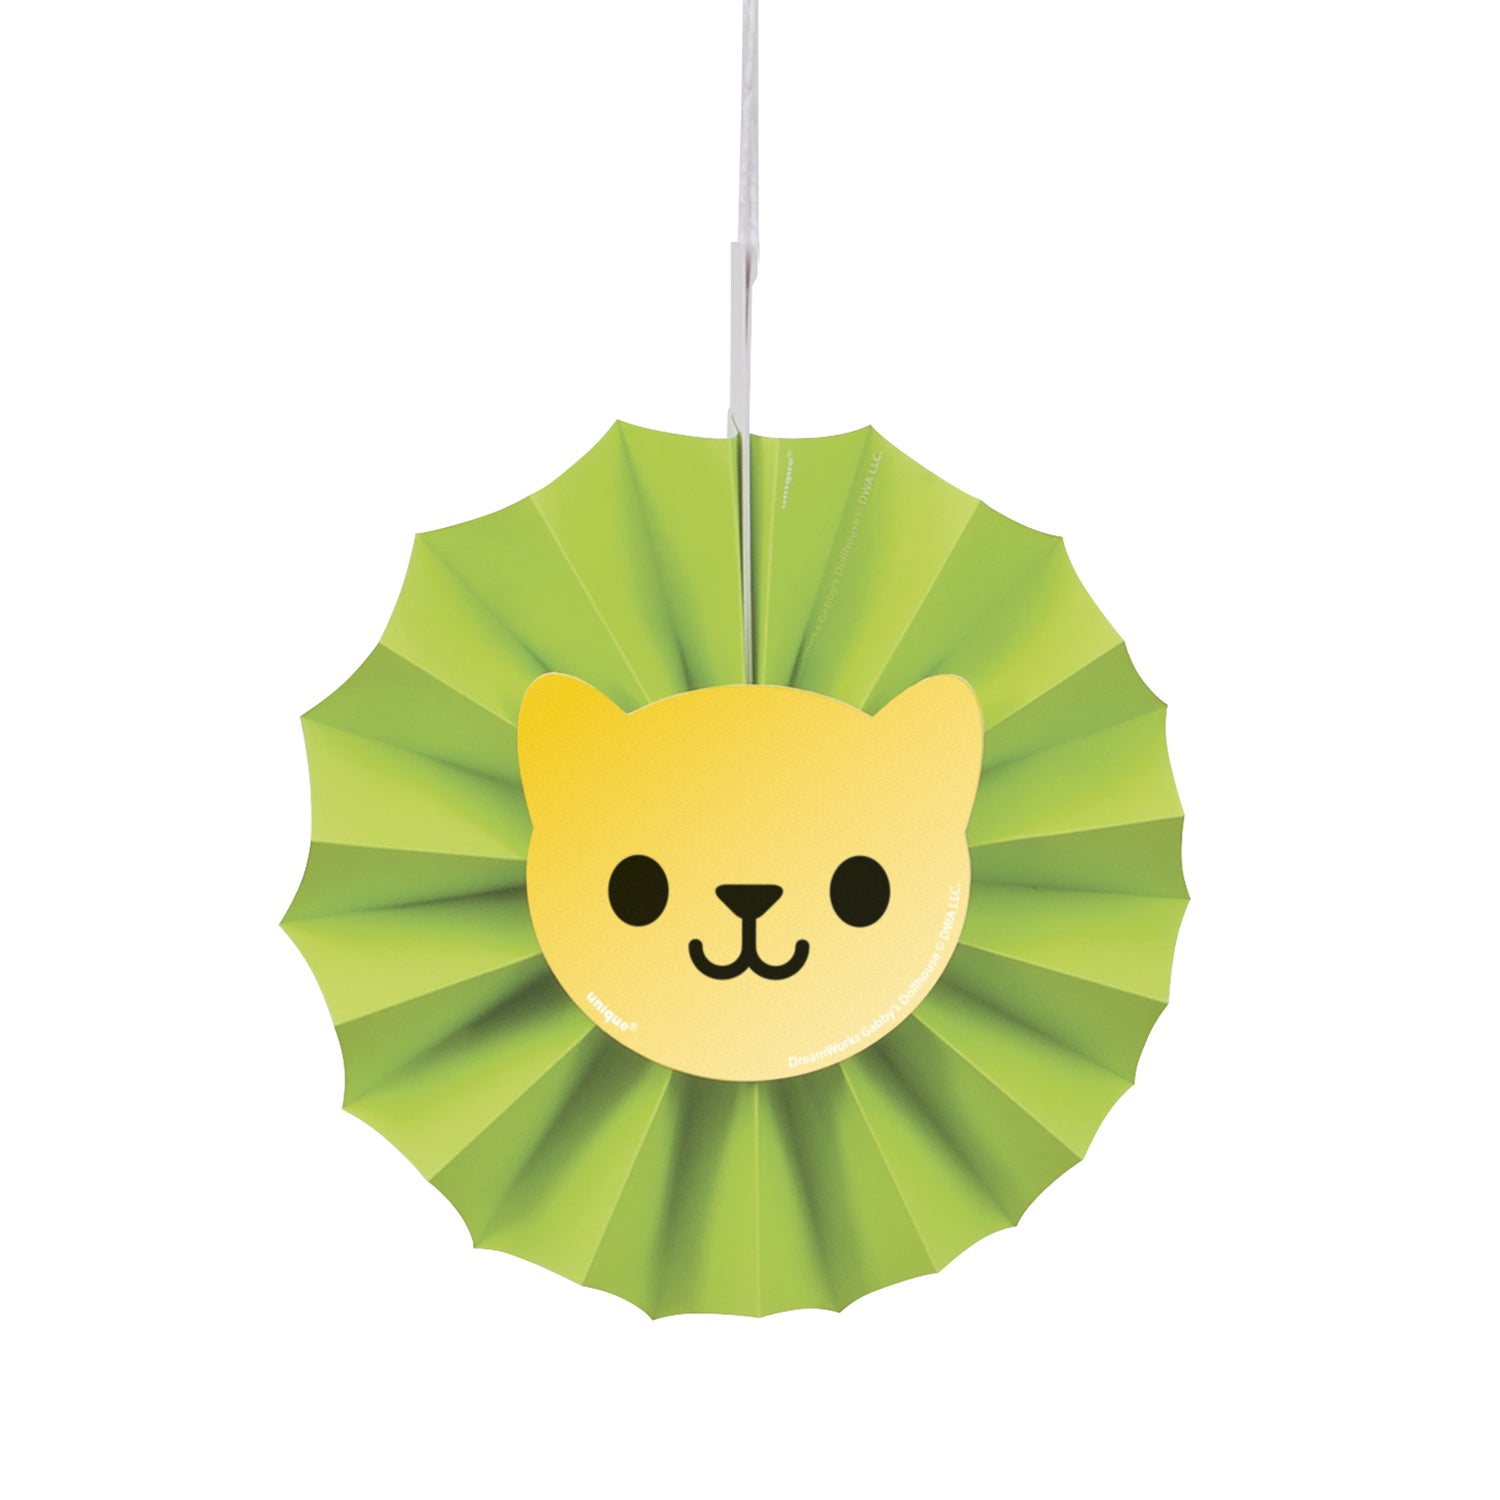 Gabby's Dollhouse Hanging Fan Party Decorations [3 per Pack]